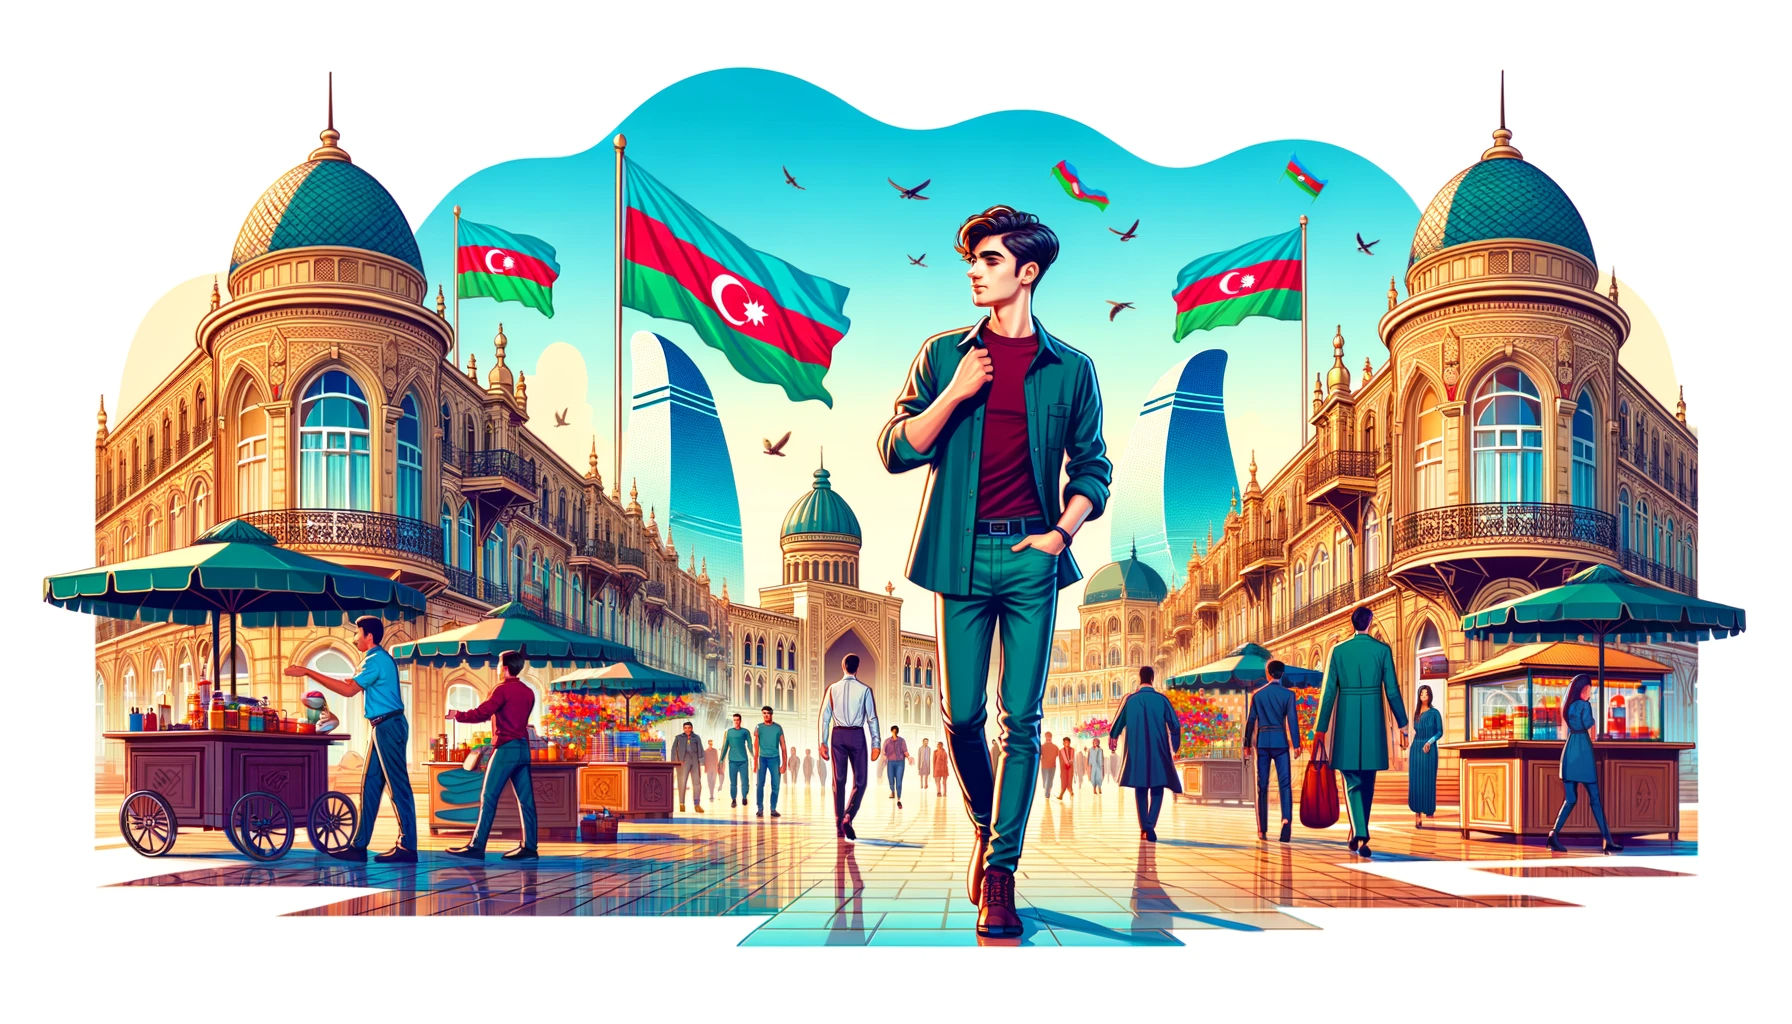 media-dall-e-2023-10-27-11-33-39-2d-illustration-showcasing-the-vibrant-streets-of-baku-a-modern-25-year-old-azerbaijani-boy-dressed-in-contemporary-clothing-walks-with-confidence